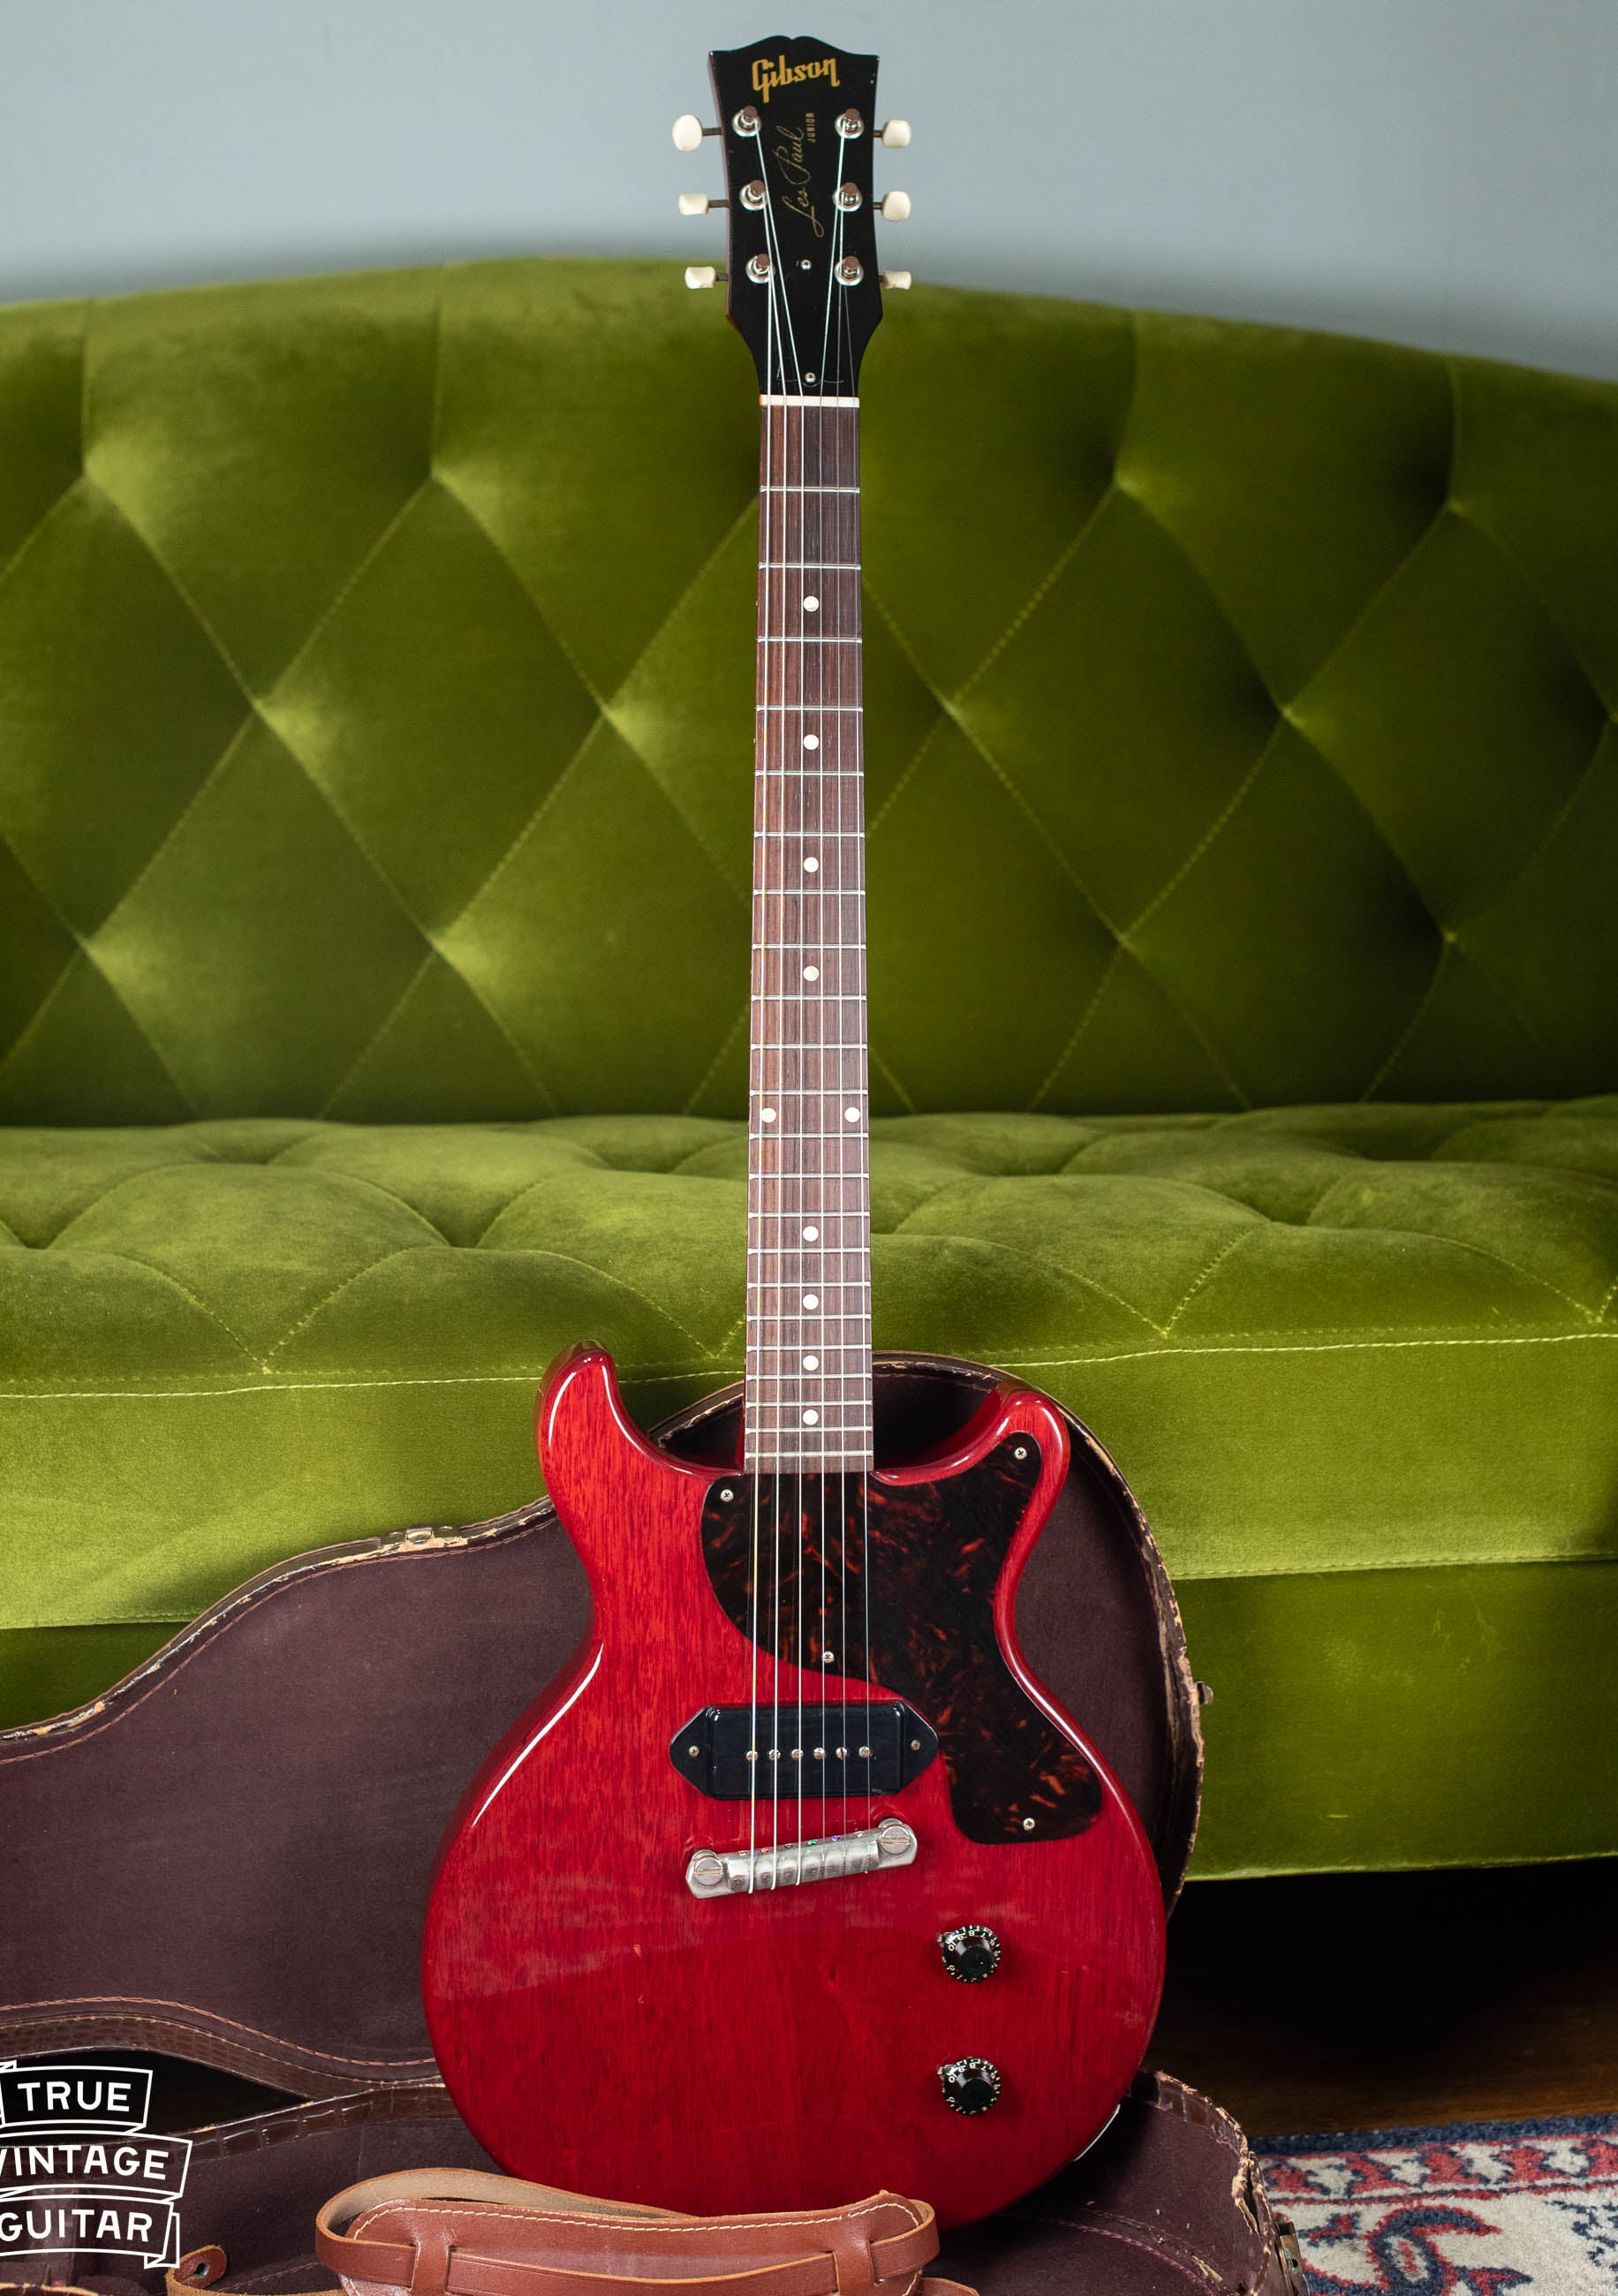 Vintage Gibson Les Paul guitar Red 1959